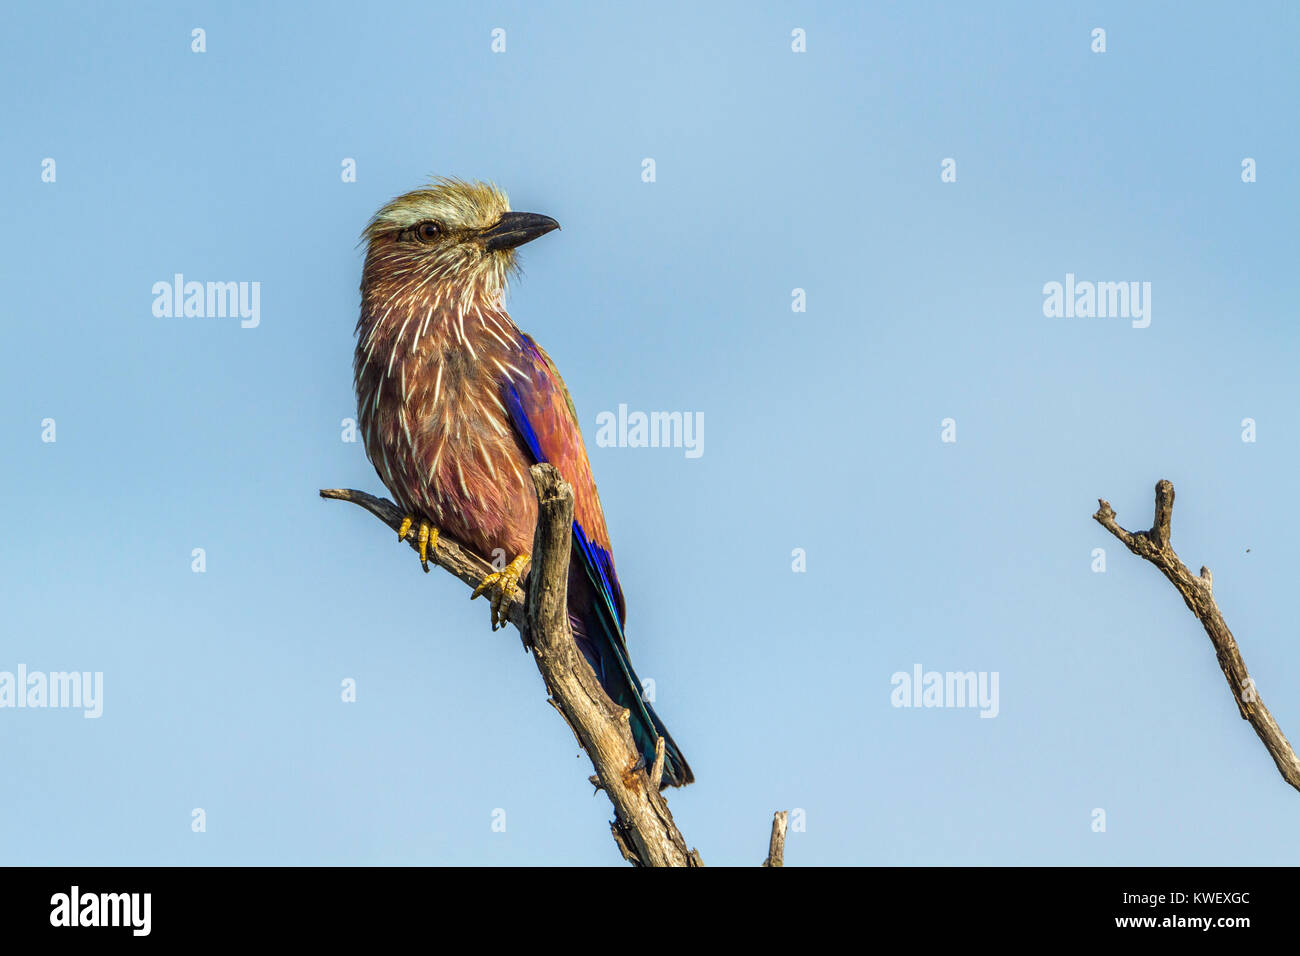 Rufous-crowned roller in Kruger national park, South Africa ; Specie Coracias naevius family of Coraciidae Stock Photo